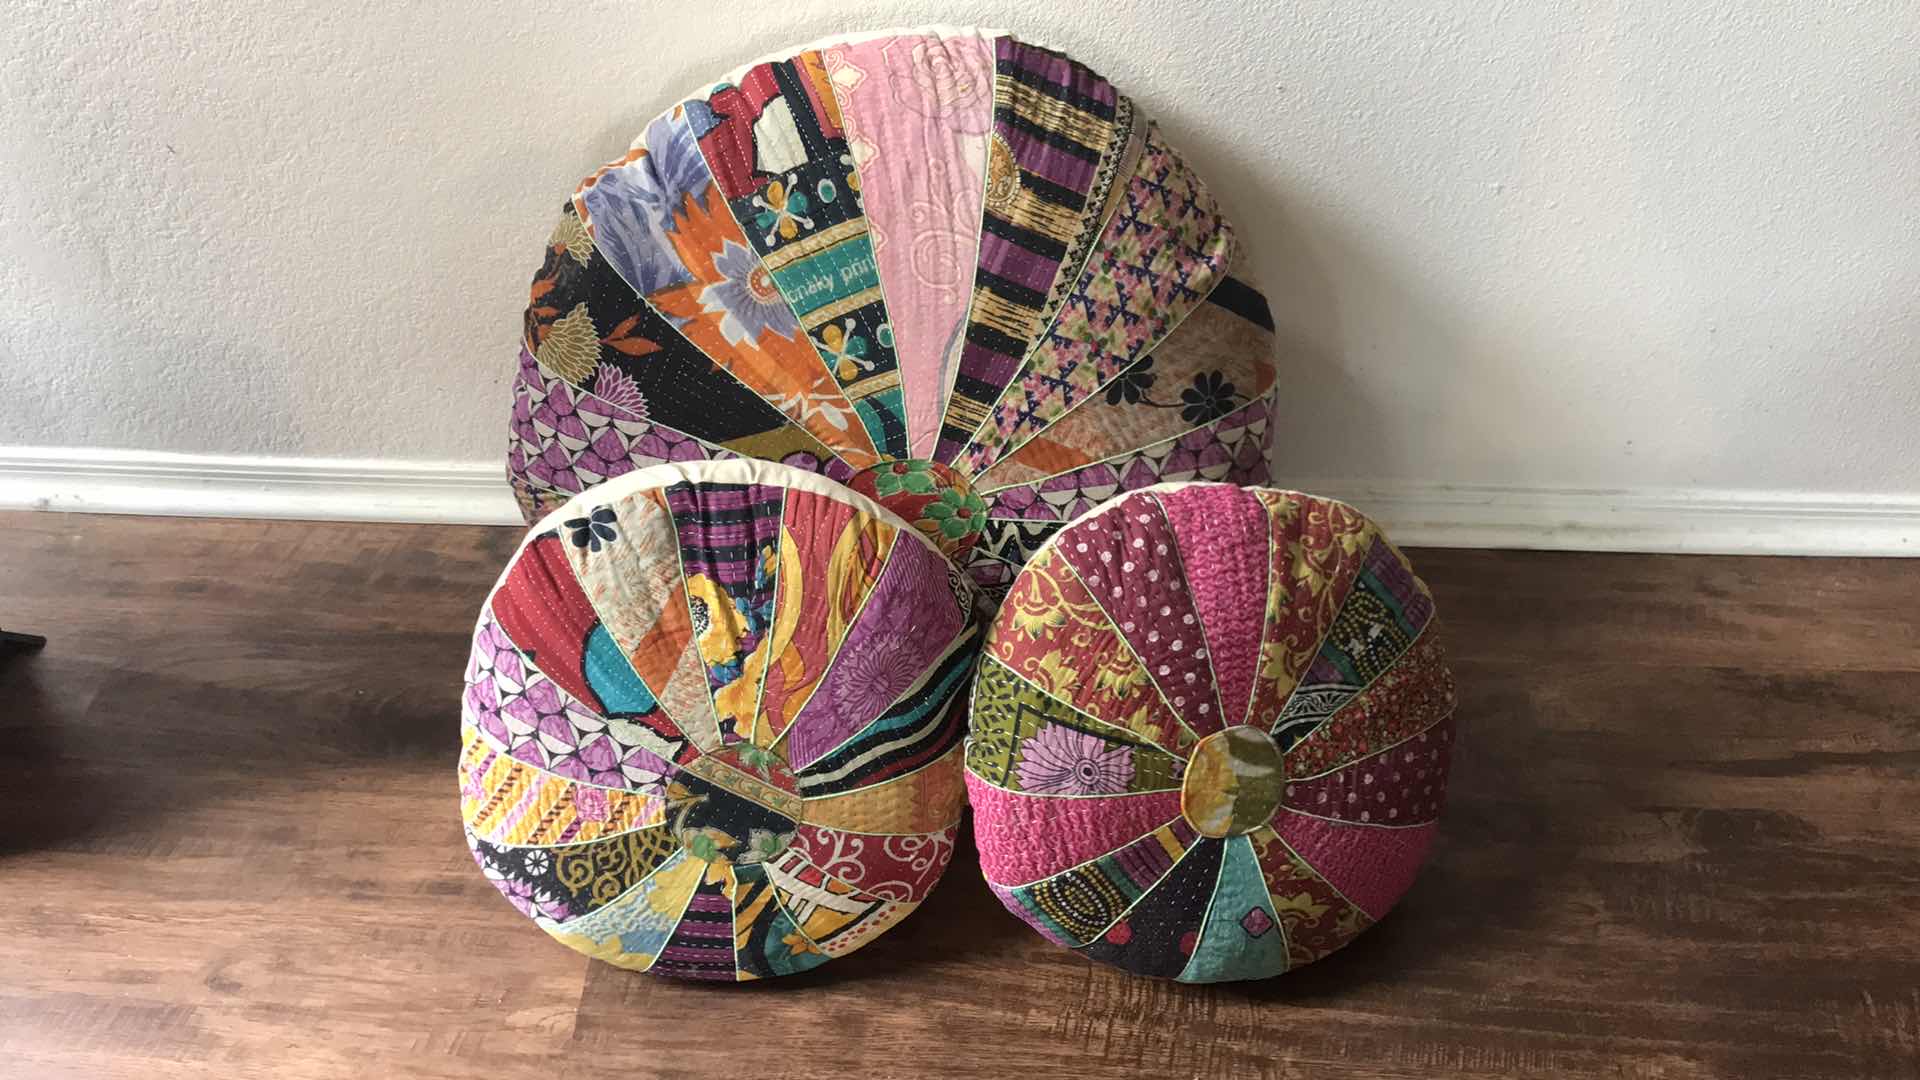 Photo 3 of INDIAN PATCHWORK KANTHA POUF VINTAGE POUF CASE, LARGE ROUND FLOOR PILLOW, HANDMADE SEATING POUFFE,

